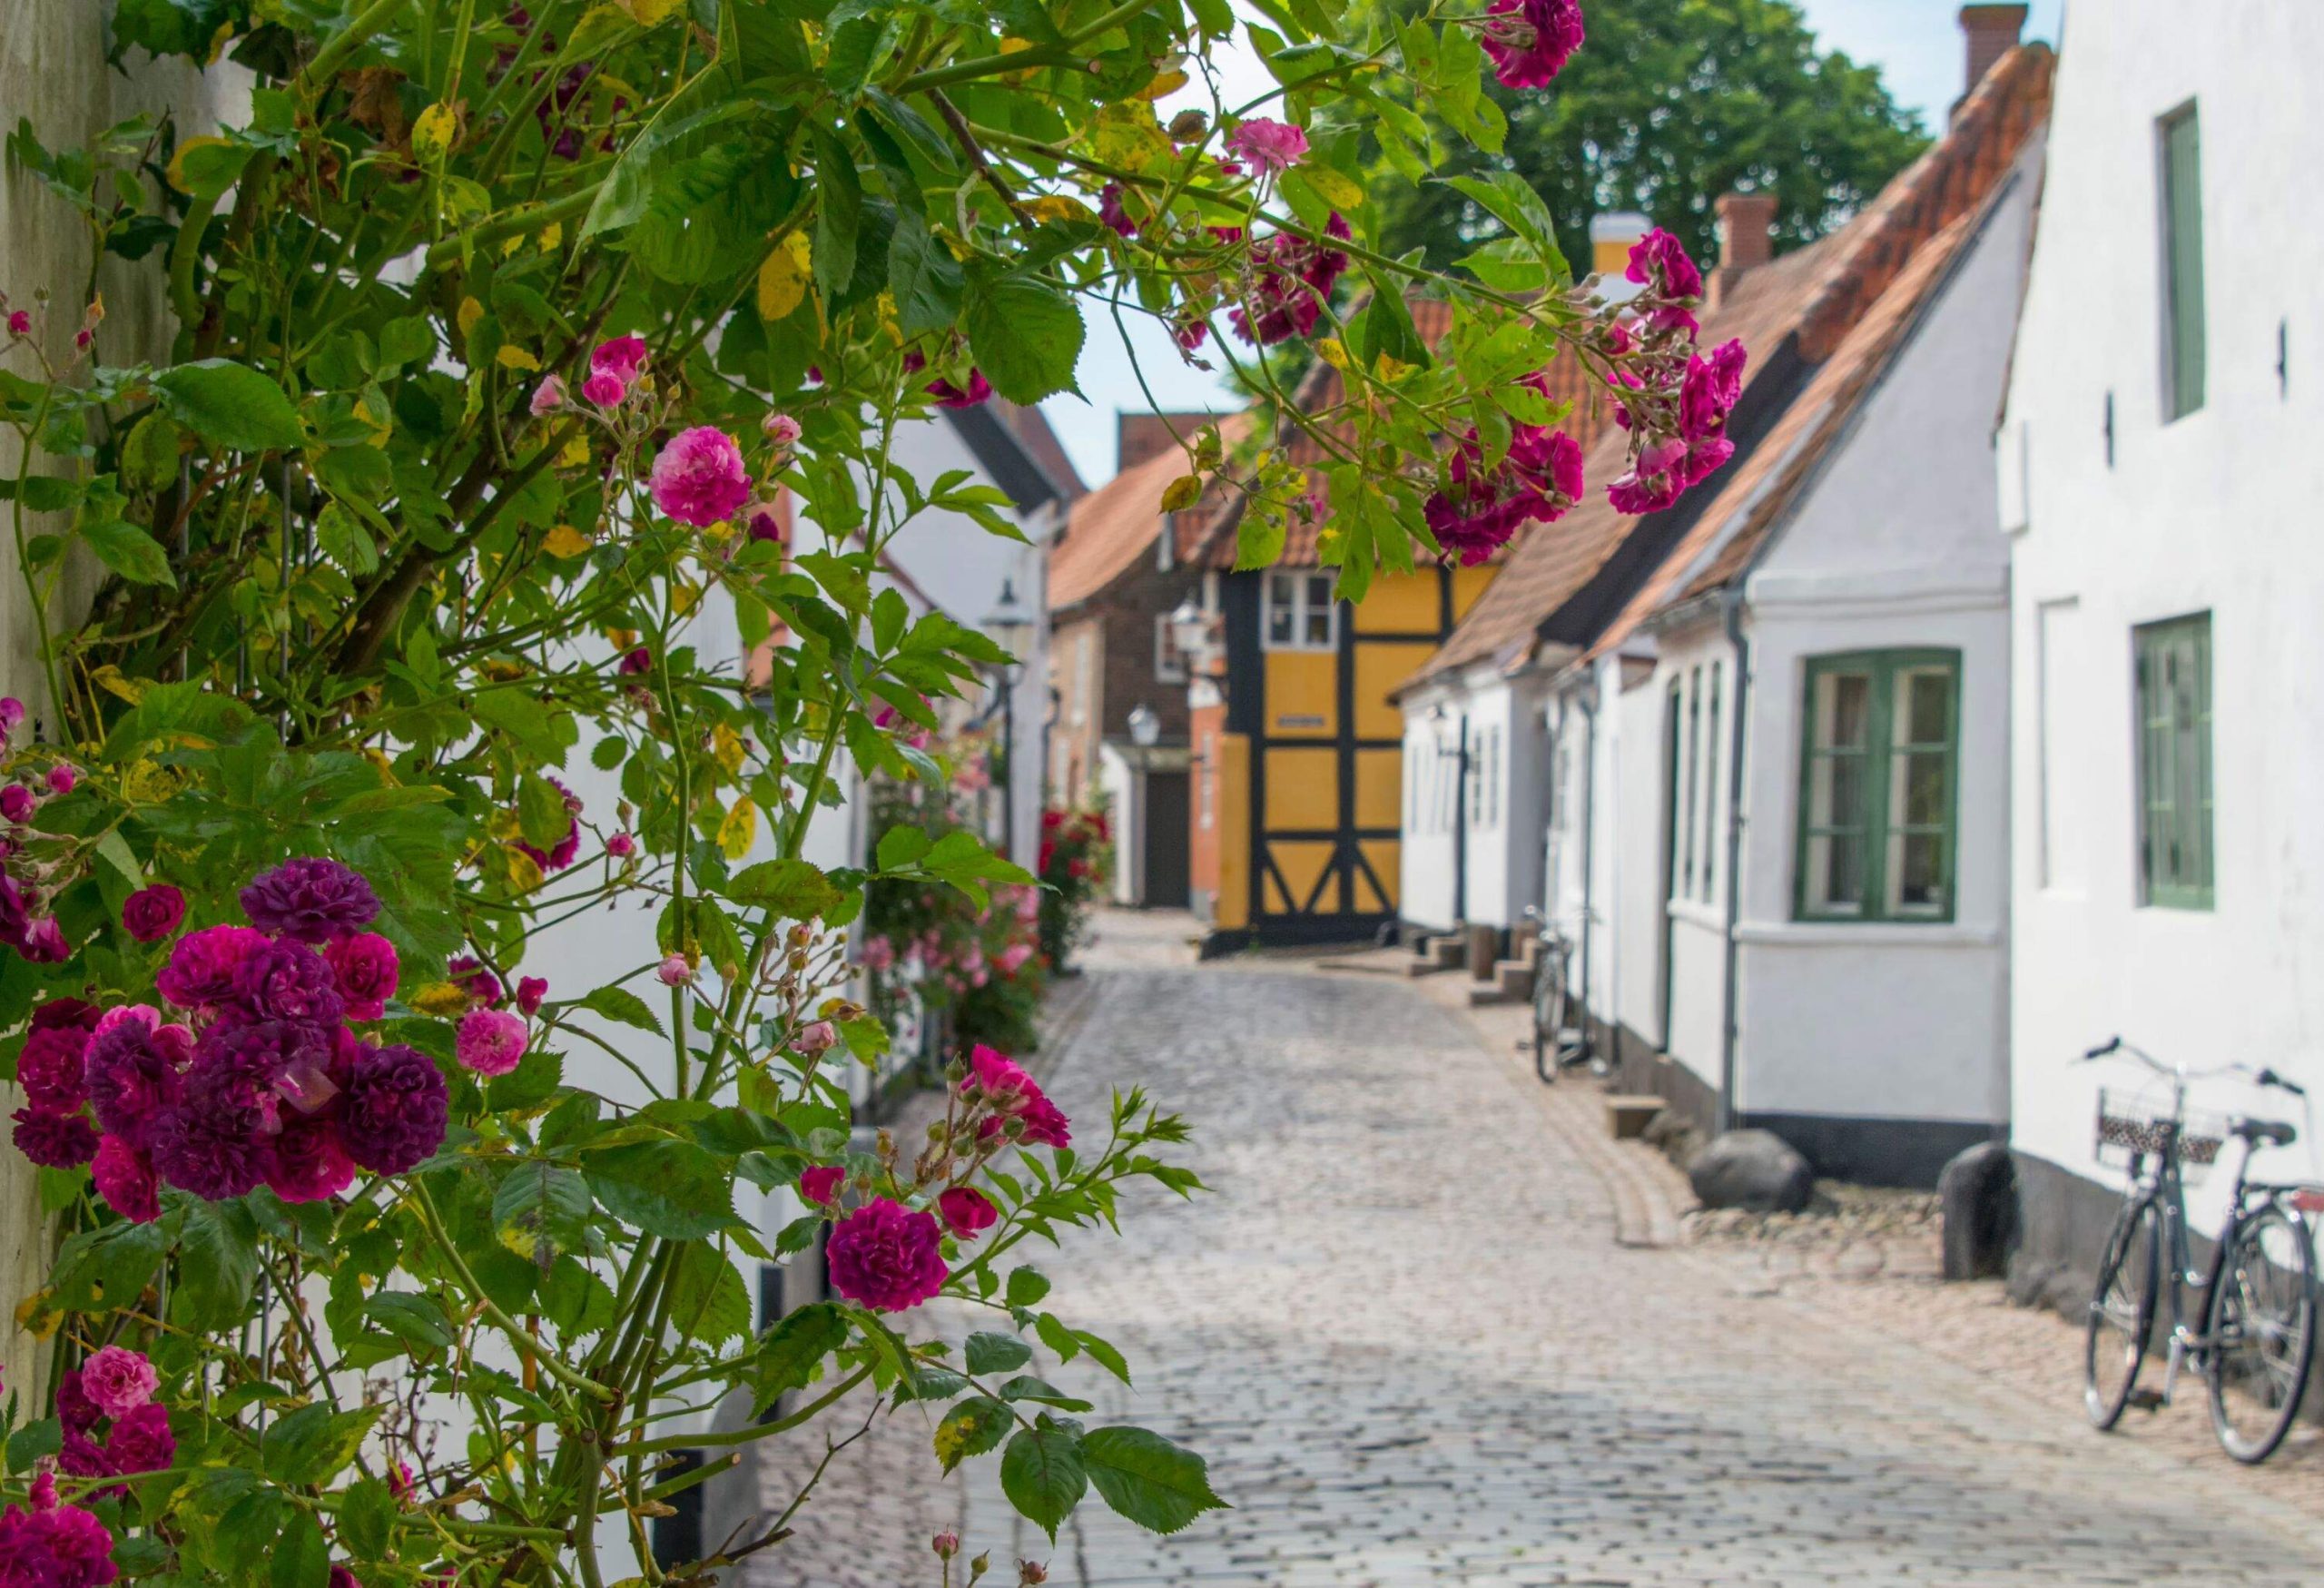 Ribe is Denmark's oldest town located in in south-west Jutland